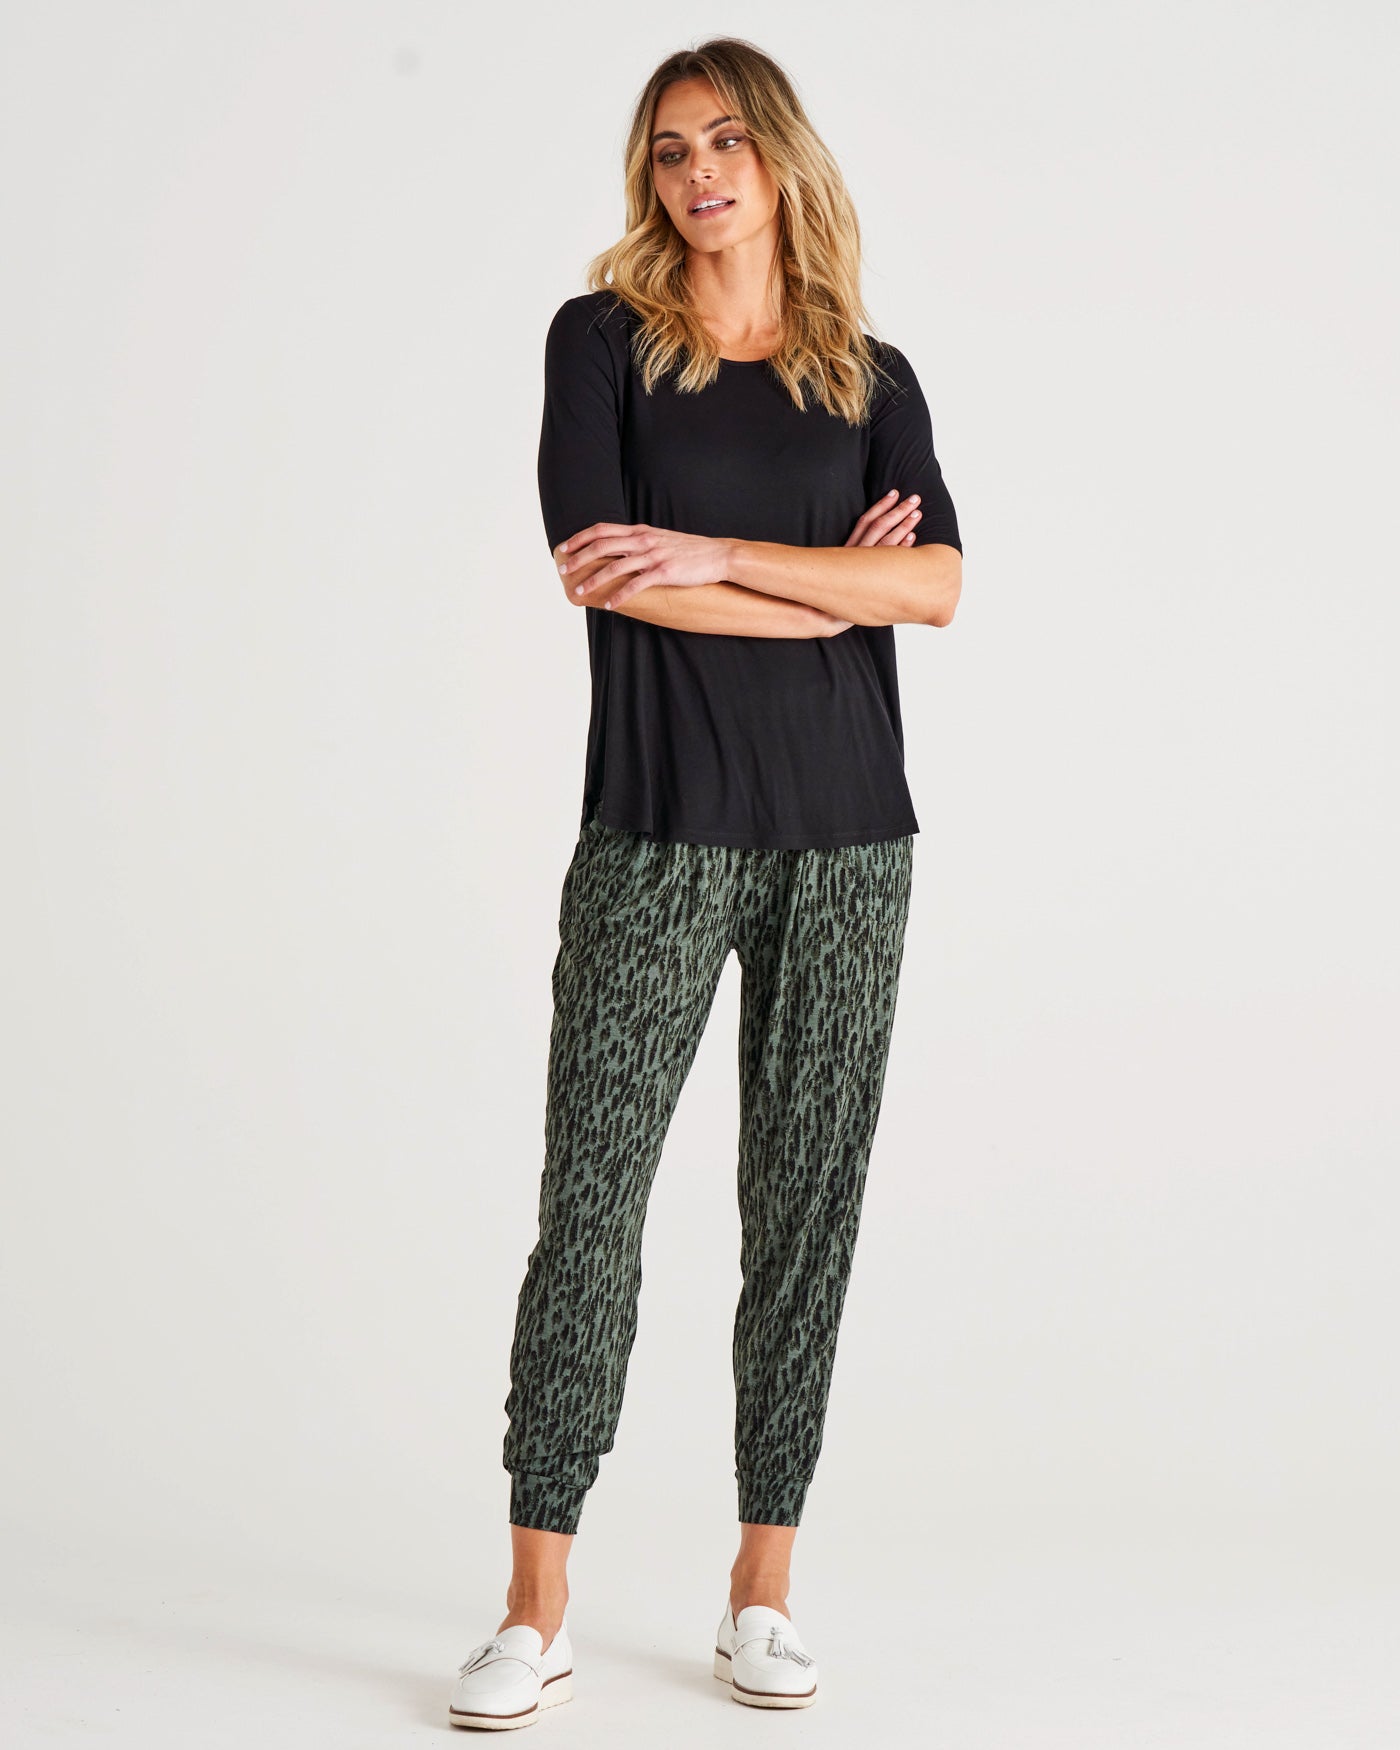 Paris Mid-Rise Stretchy Loose Fitting Jogger Pants - Abstract Green Print